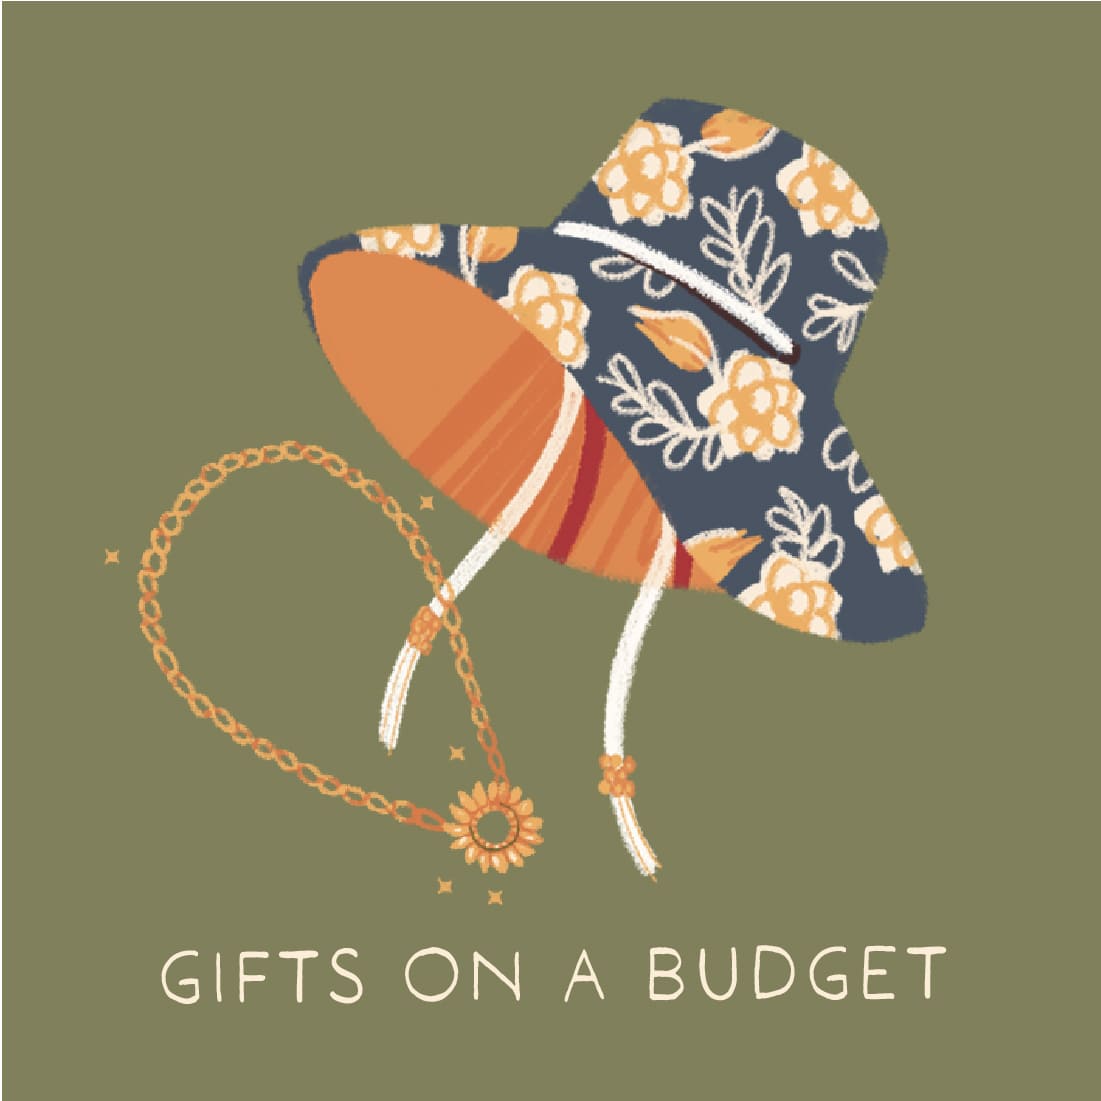 GIFTS ON A BUDGET